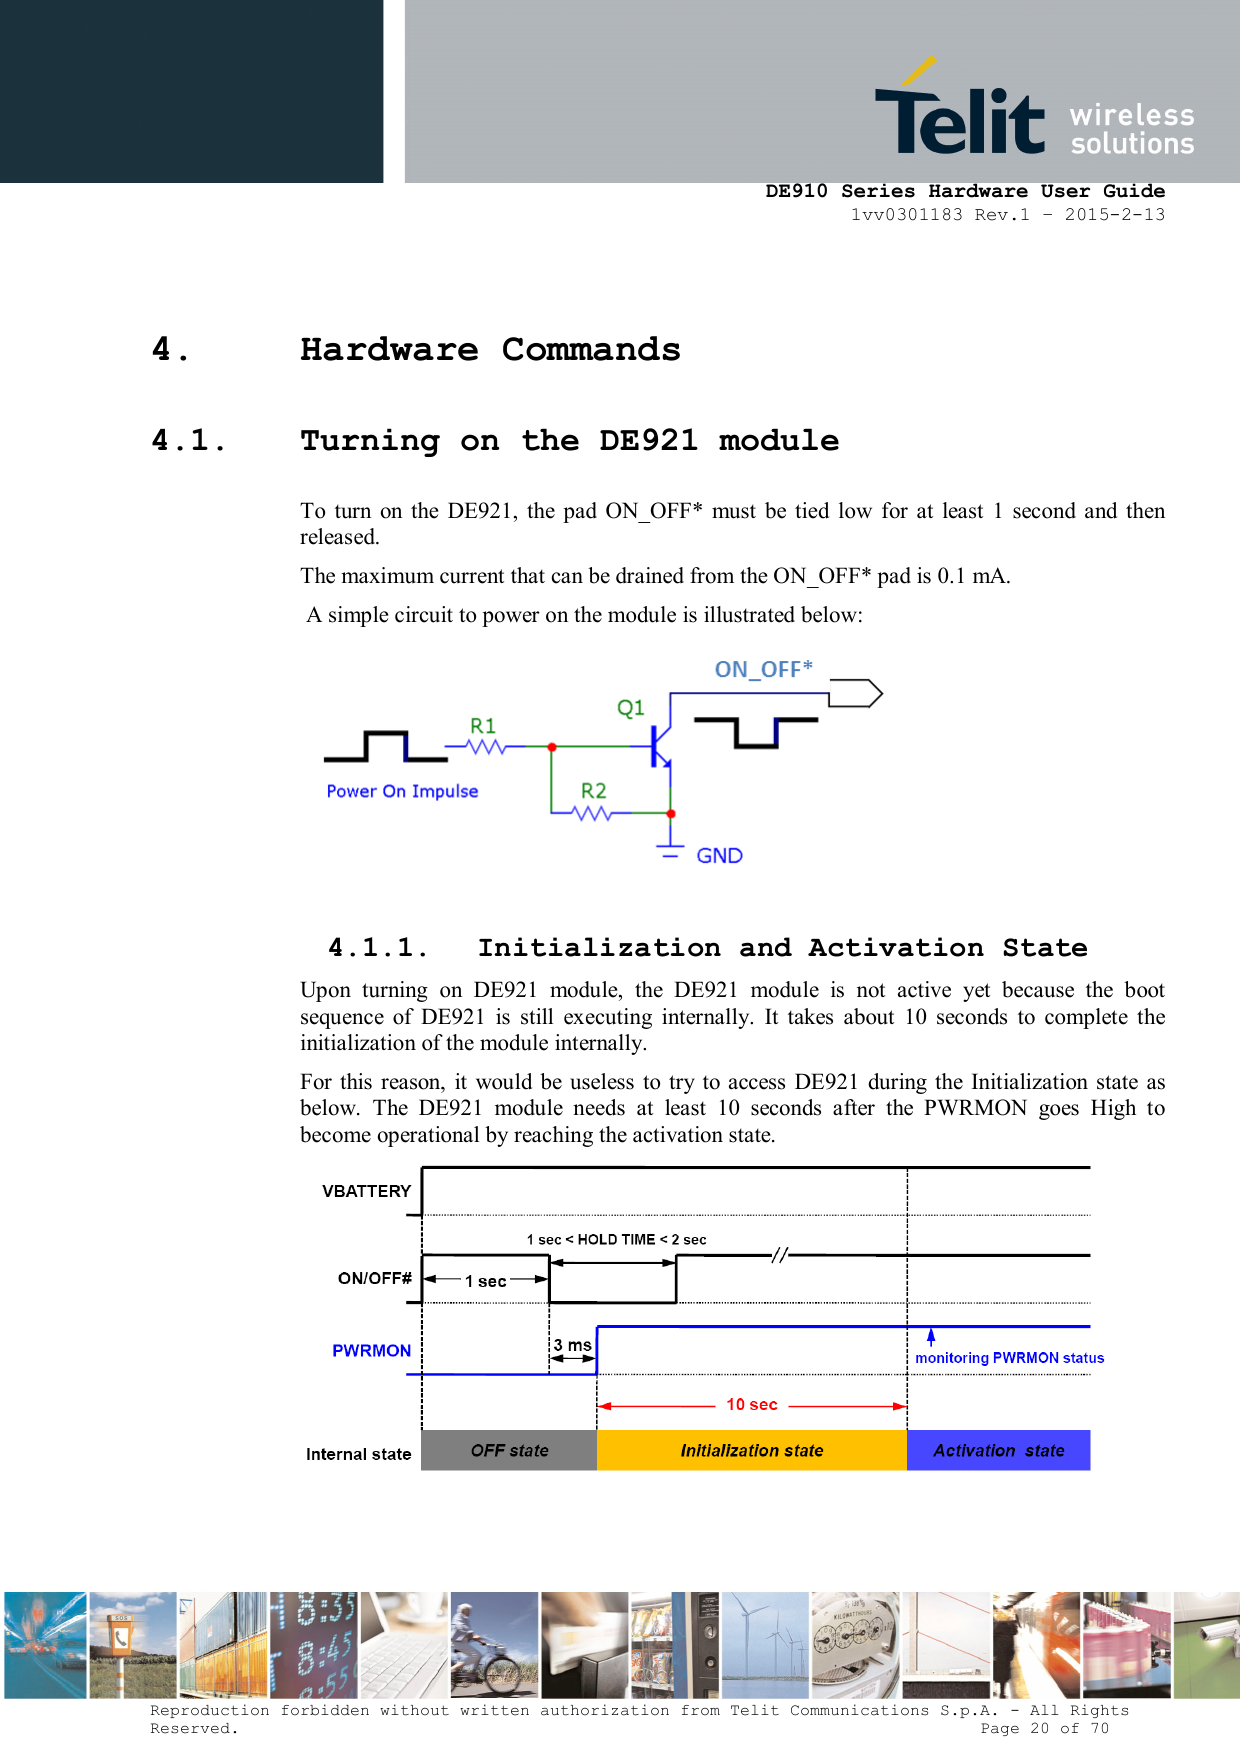      DE910 Series Hardware User Guide 1vv0301183 Rev.1 – 2015-2-13 Reproduction forbidden without written authorization from Telit Communications S.p.A. - All Rights Reserved.                                                                          Page 20 of 70 4. Hardware Commands 4.1. Turning on the DE921 module To  turn  on  the  DE921,  the  pad  ON_OFF*  must  be  tied  low  for  at  least  1  second  and  then released. The maximum current that can be drained from the ON_OFF* pad is 0.1 mA.  A simple circuit to power on the module is illustrated below:   4.1.1. Initialization and Activation State Upon  turning  on  DE921  module,  the  DE921  module  is  not  active  yet  because  the  boot sequence  of  DE921  is  still  executing  internally.  It  takes  about  10  seconds  to  complete  the initialization of the module internally. For this  reason,  it  would  be  useless  to  try  to access  DE921  during the Initialization  state as below.  The  DE921  module  needs  at  least  10  seconds  after  the  PWRMON  goes  High  to become operational by reaching the activation state.   